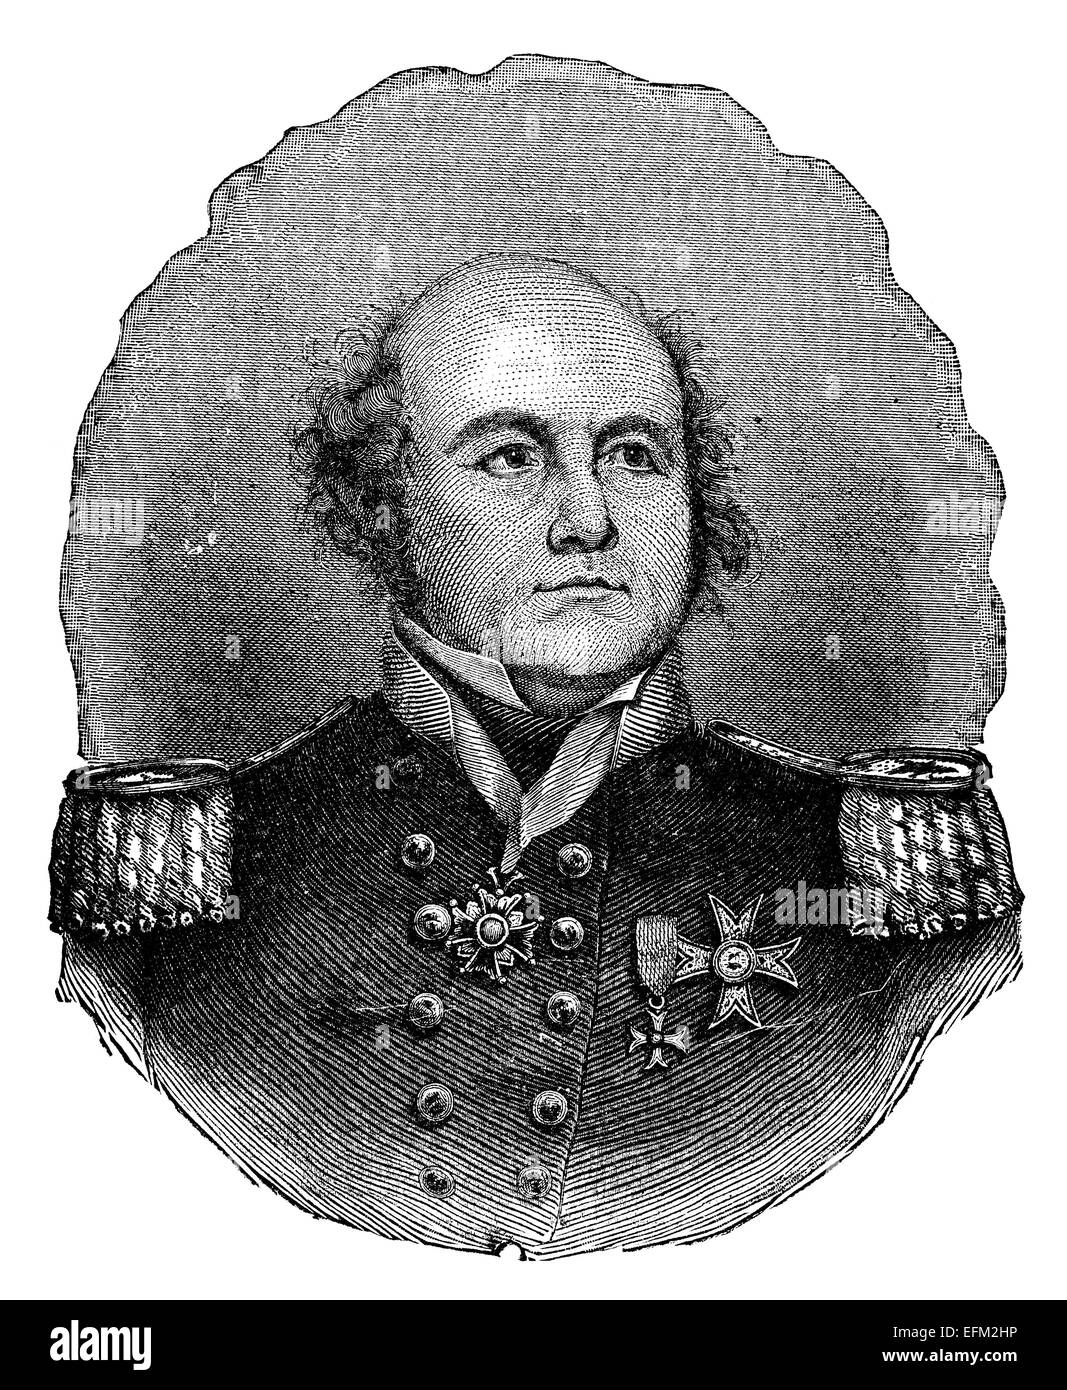 19th century engraving of John Franklin wearing a military uniform with medals Stock Photo